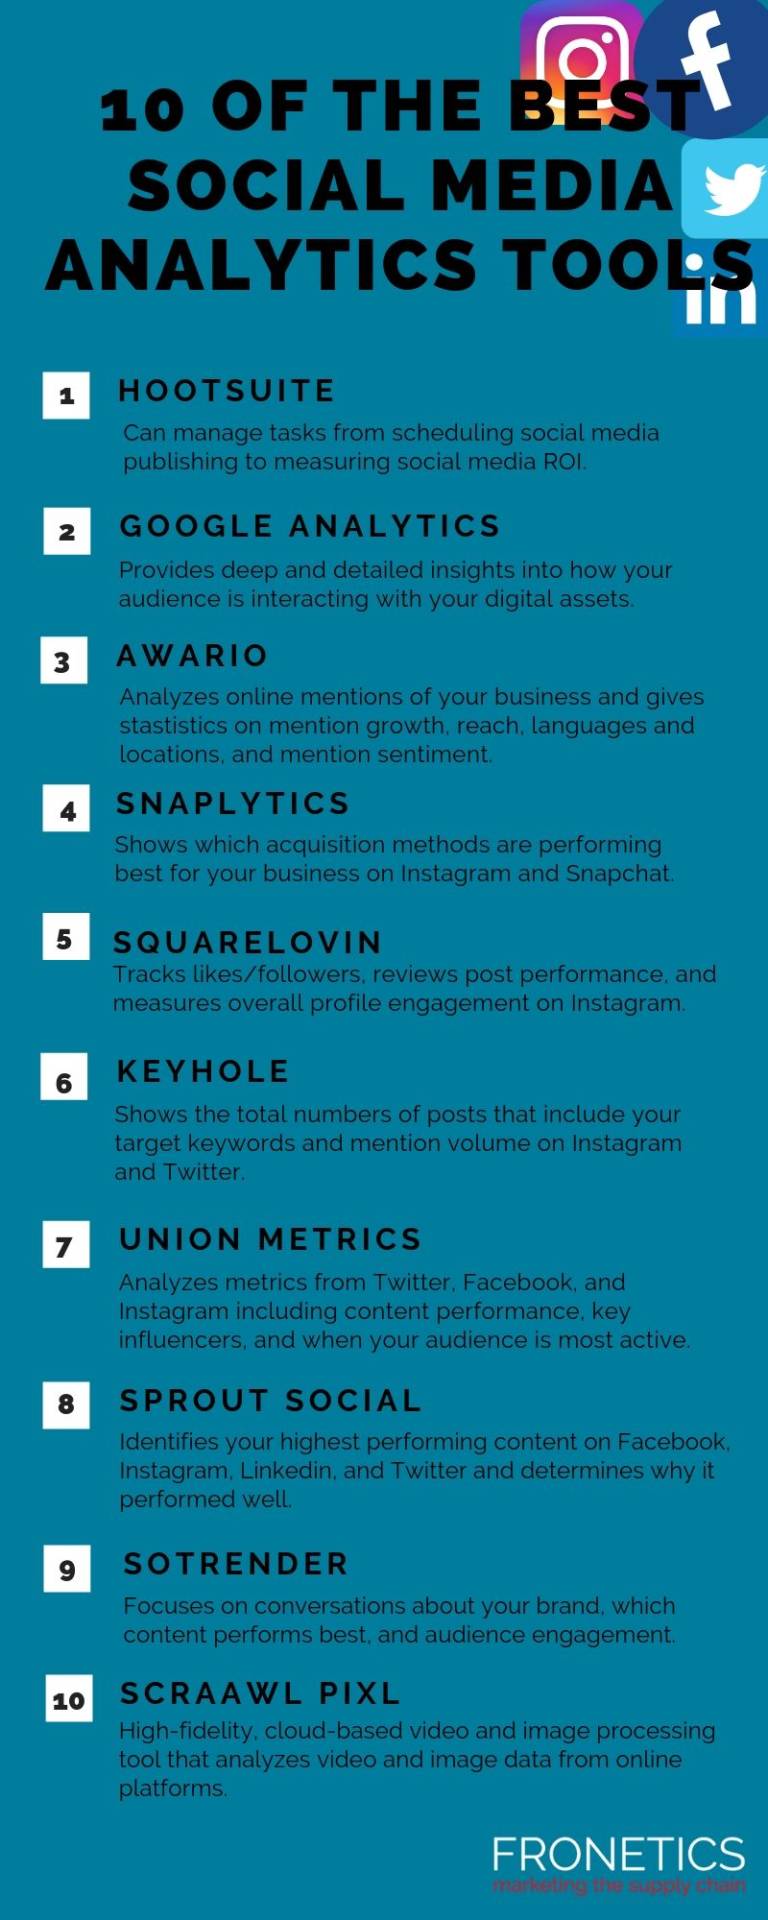 Infographic 10 of the Best Social Media Analytics Tools